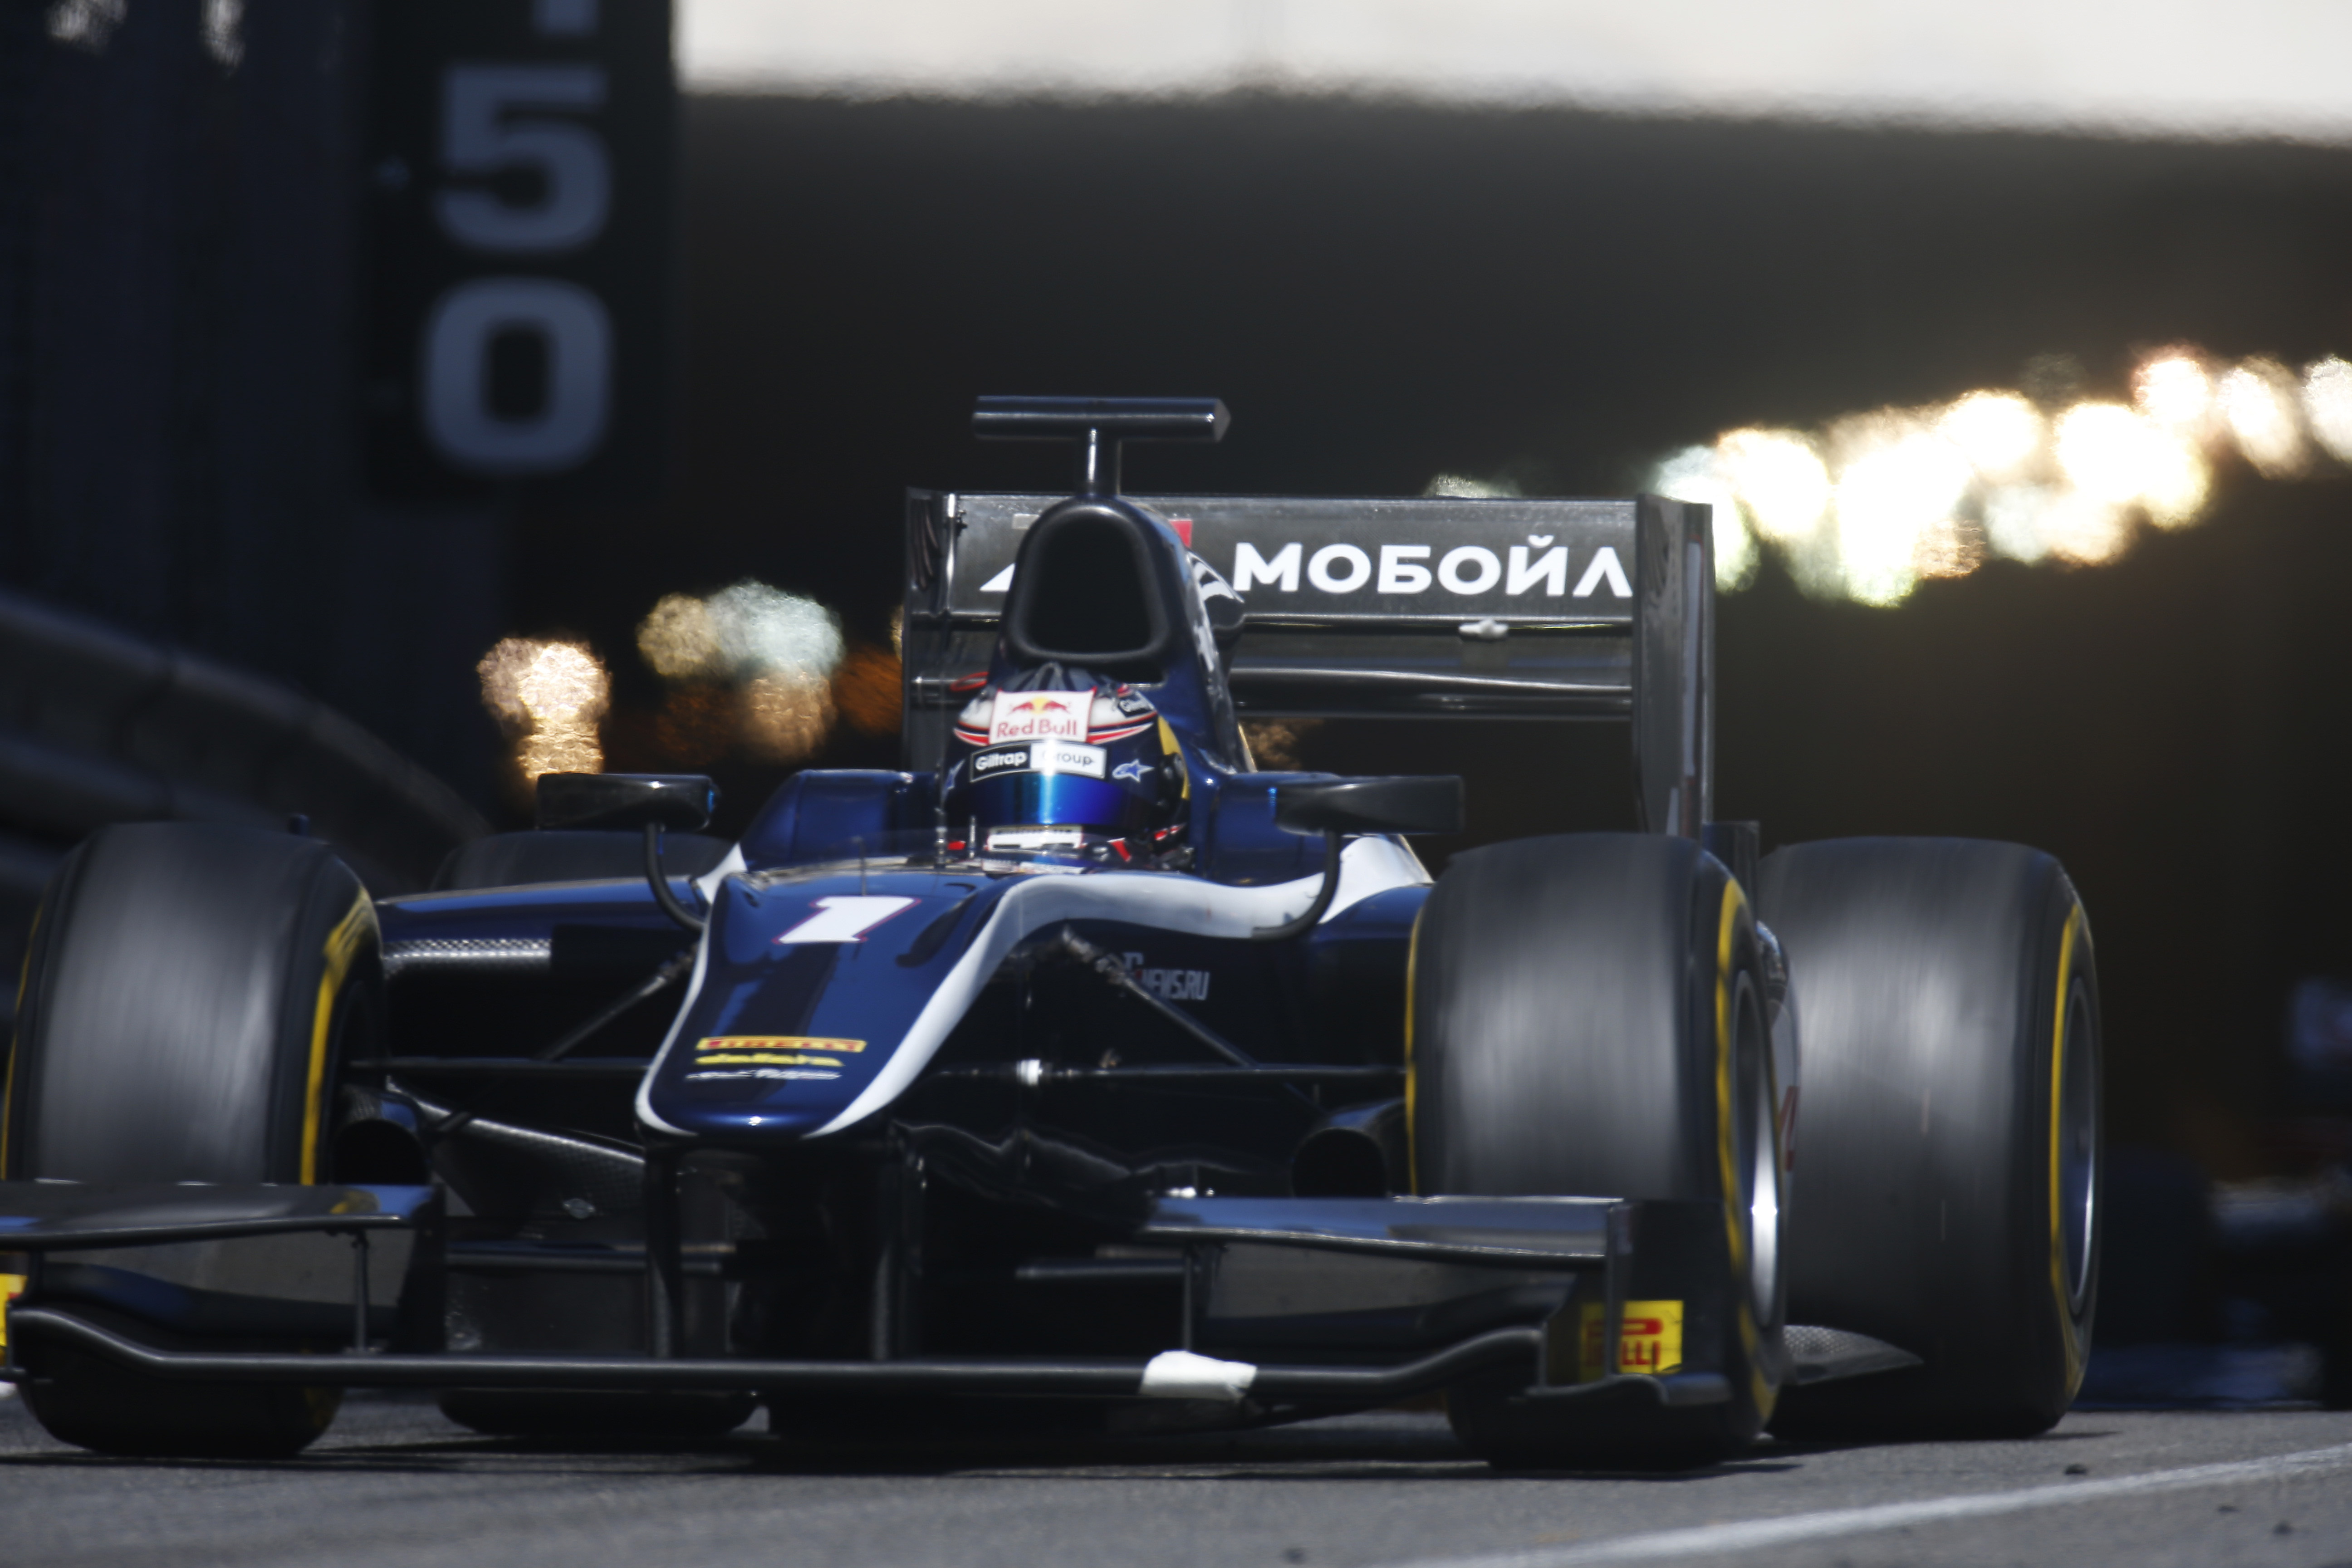 More points for Evans in Monaco Sprint Race